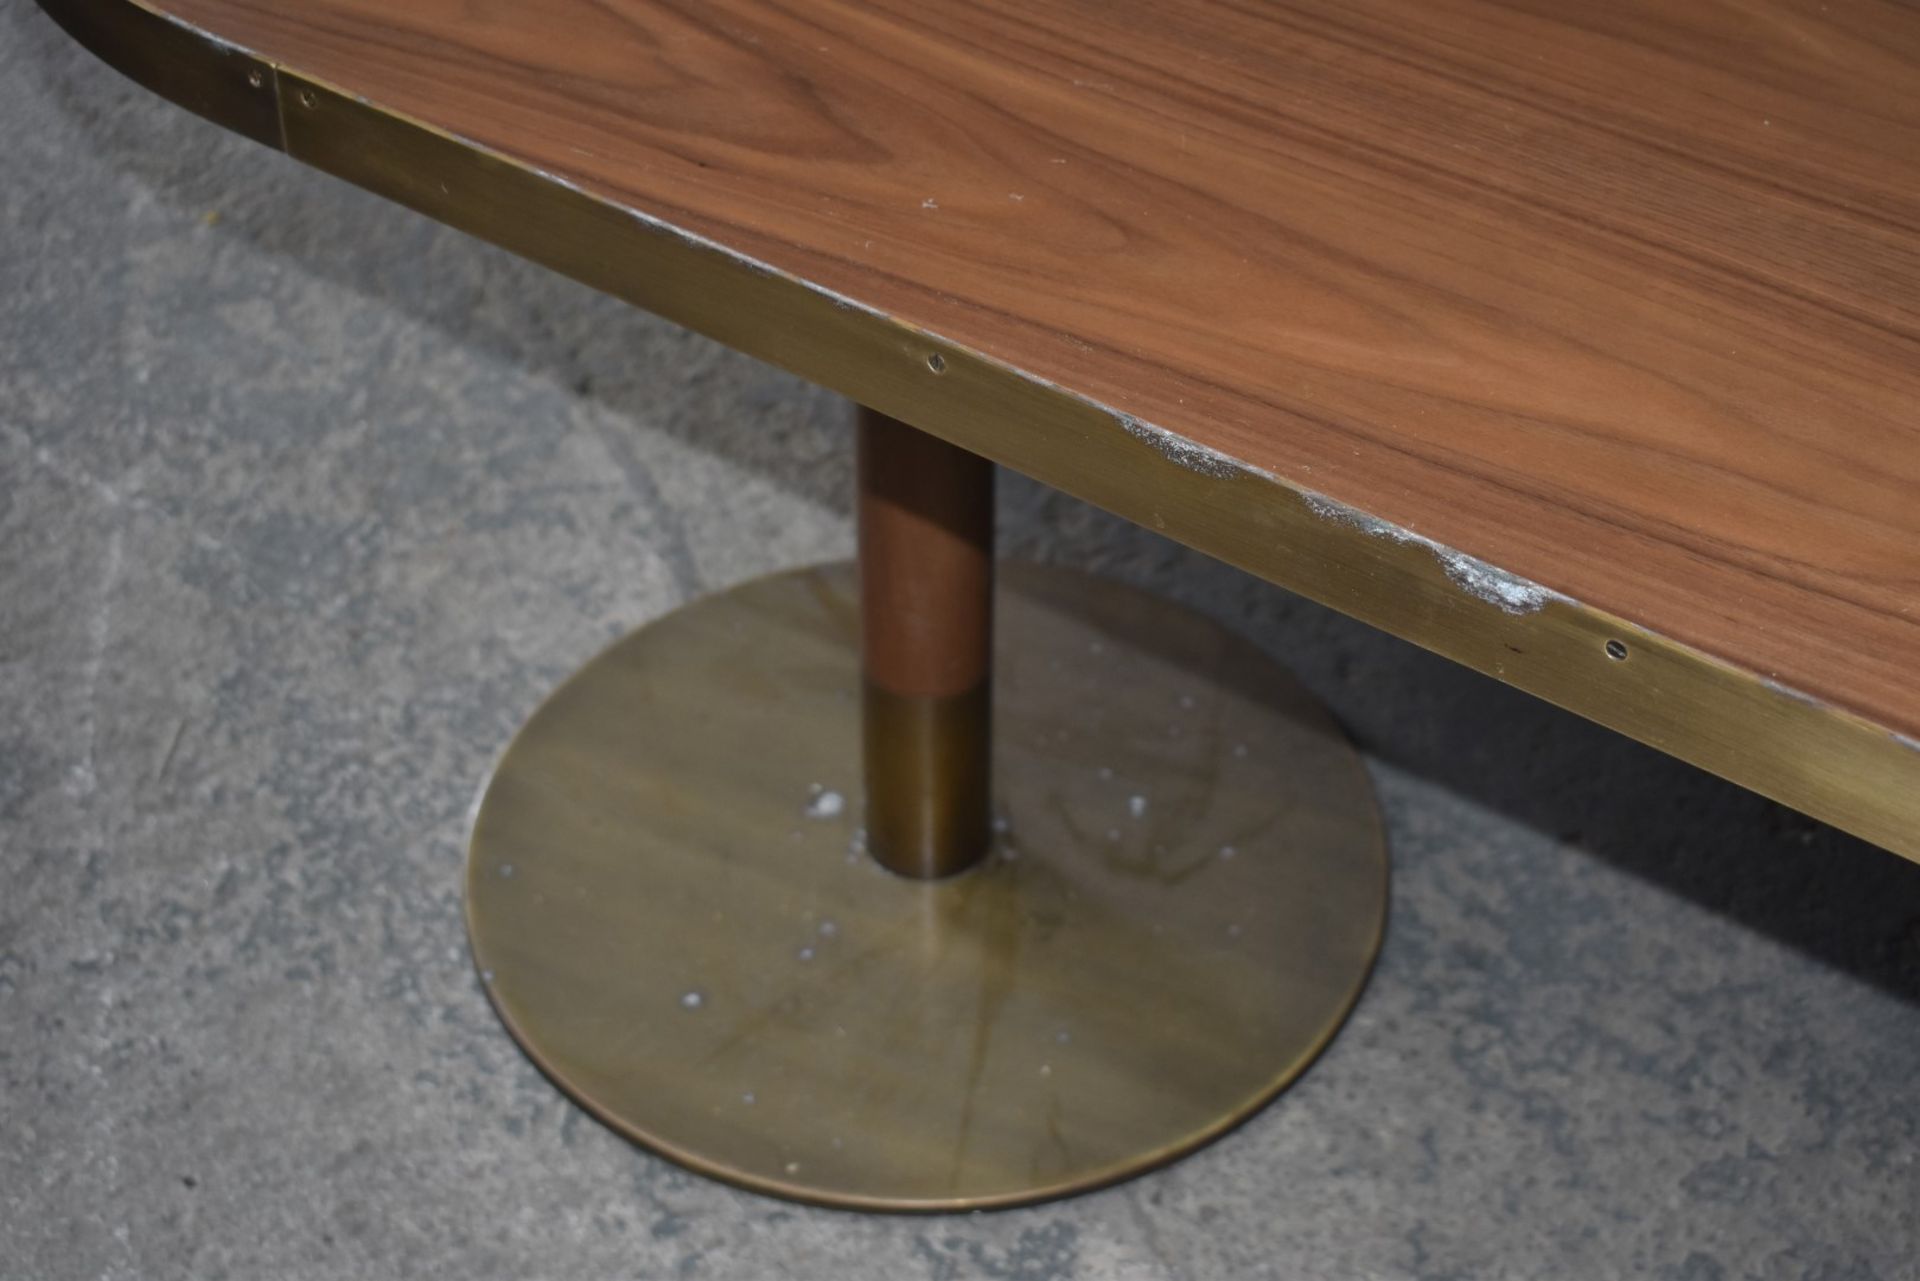 1 x Oval Banqueting Dining Table By AKP Design Athens - Walnut Top With Antique Brass Edging - Image 16 of 16